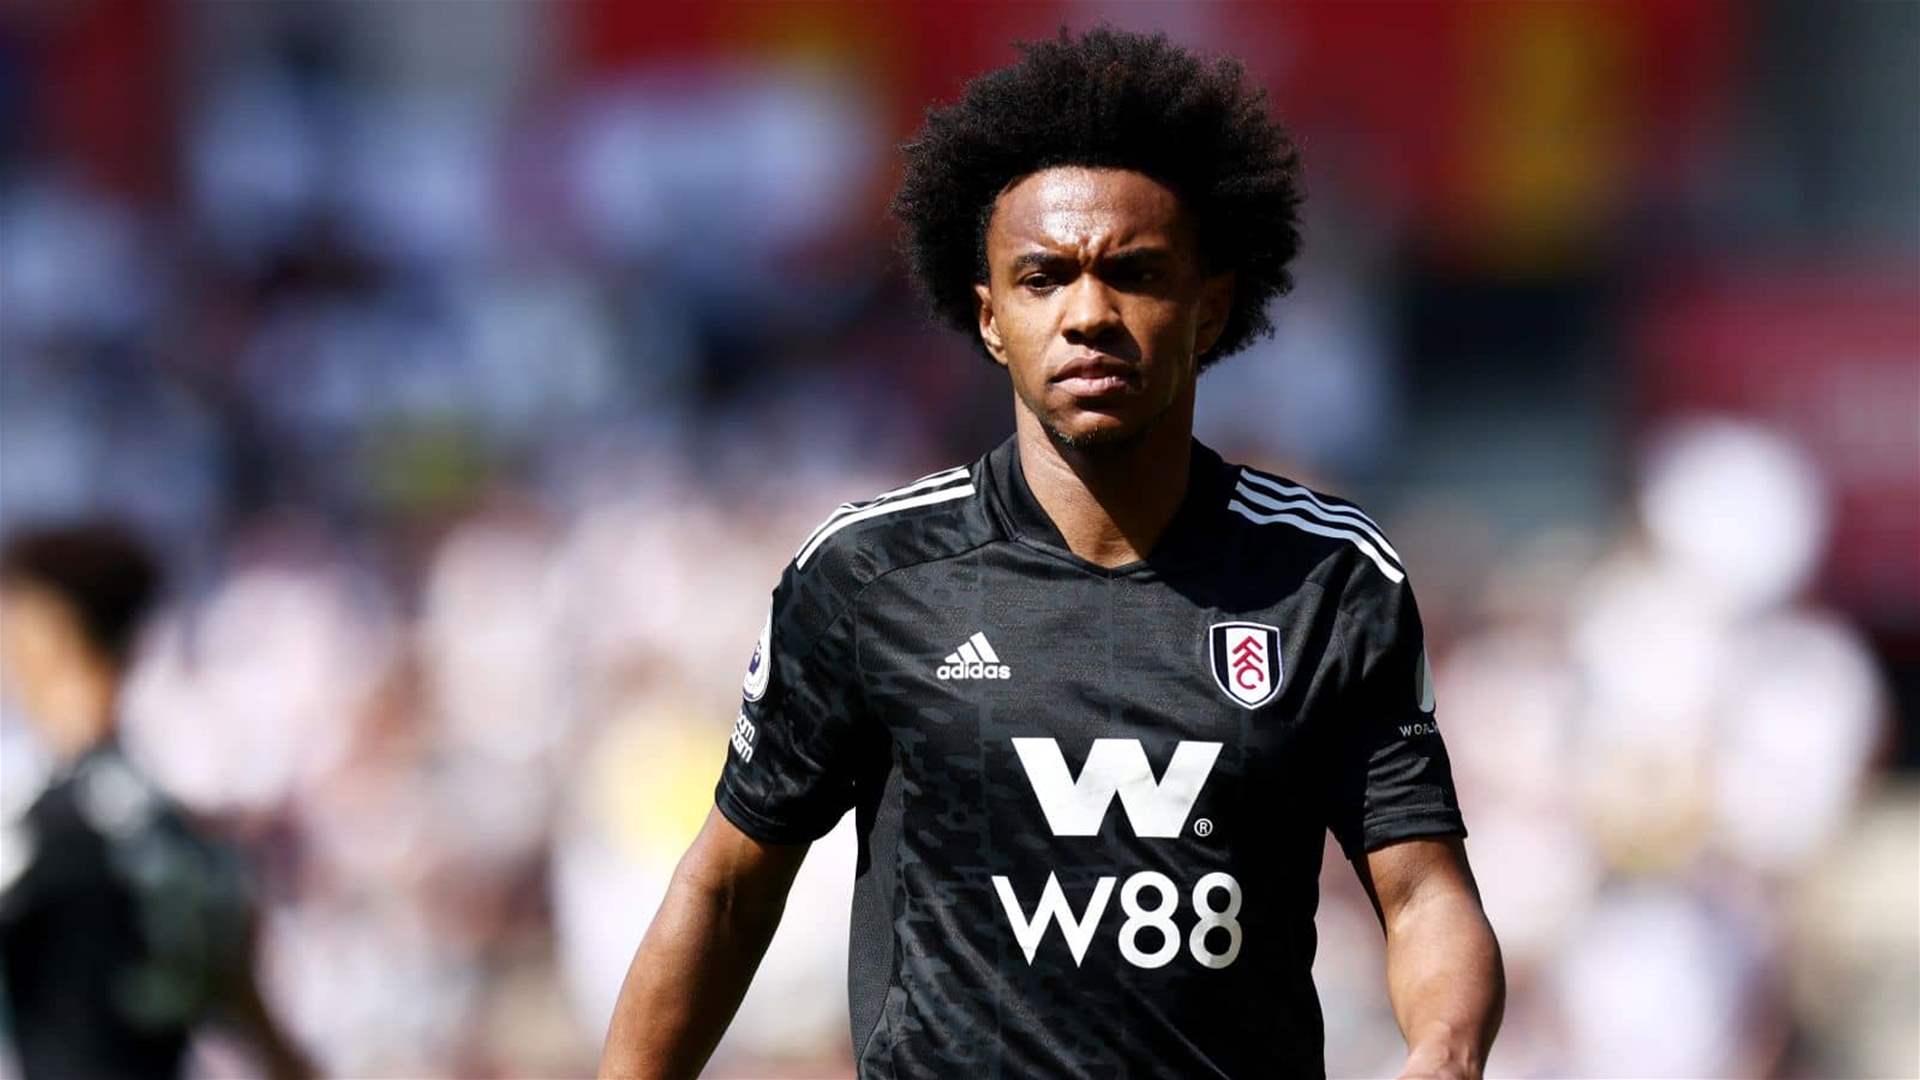 England Premier League: Brazilian Willian decides to stay with Fulham for another season